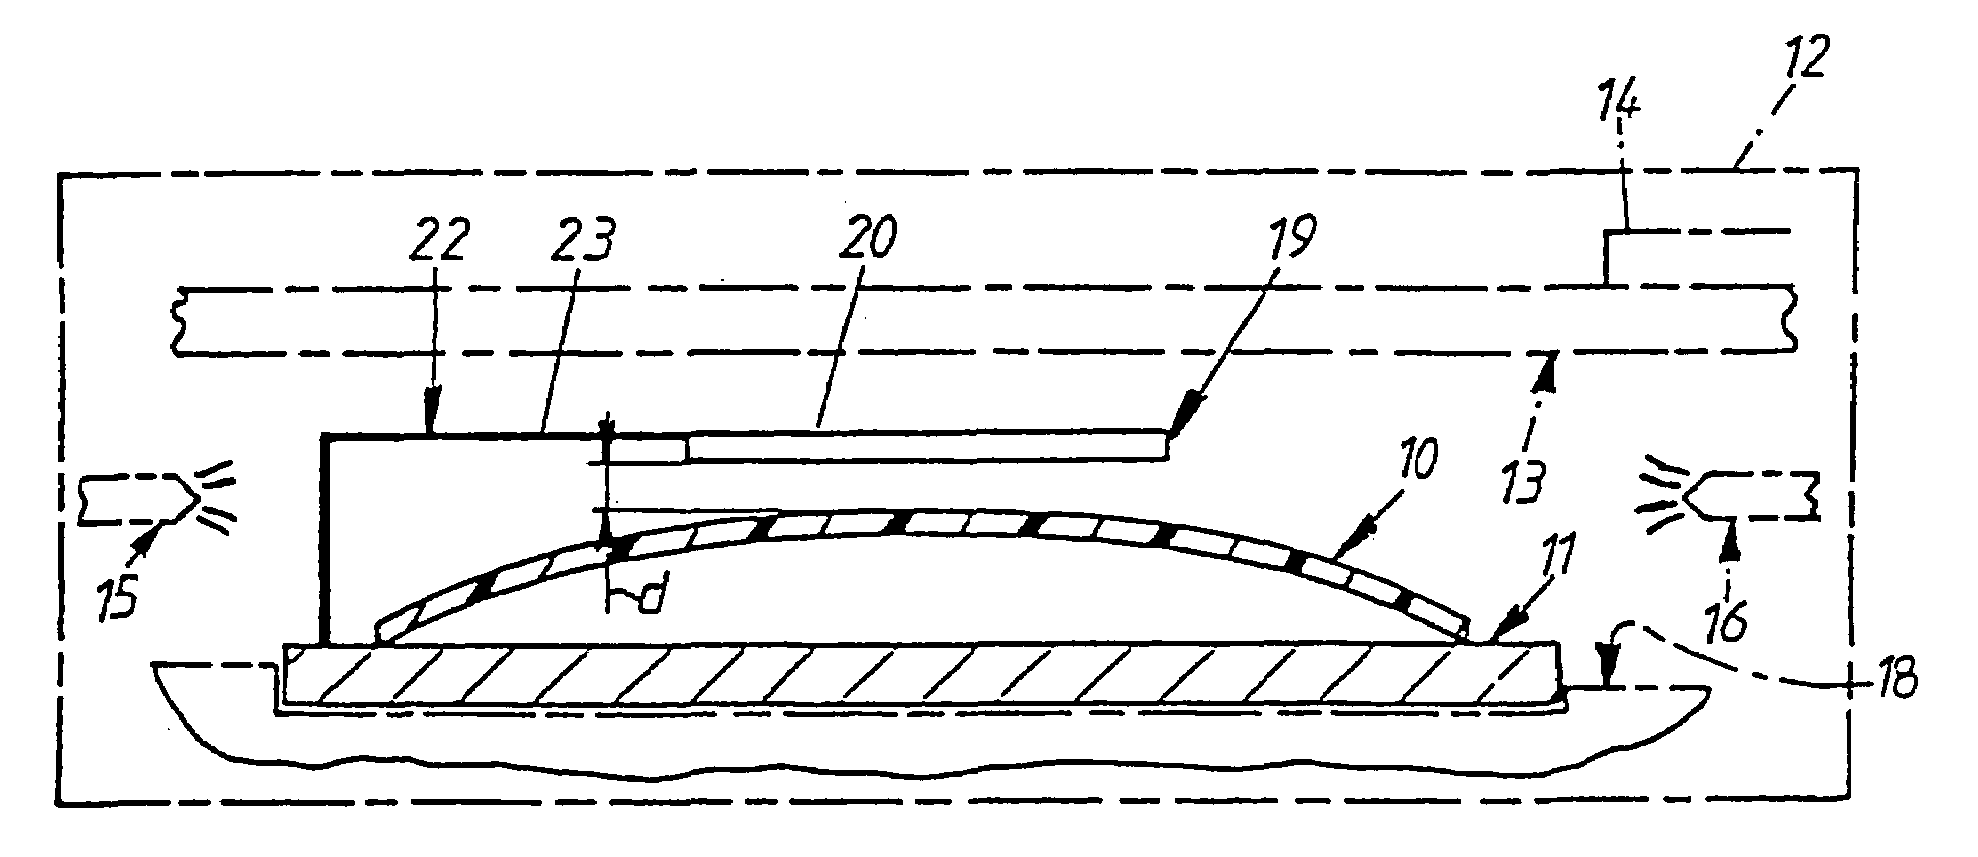 Method for vacuum deposit on a curved substrate